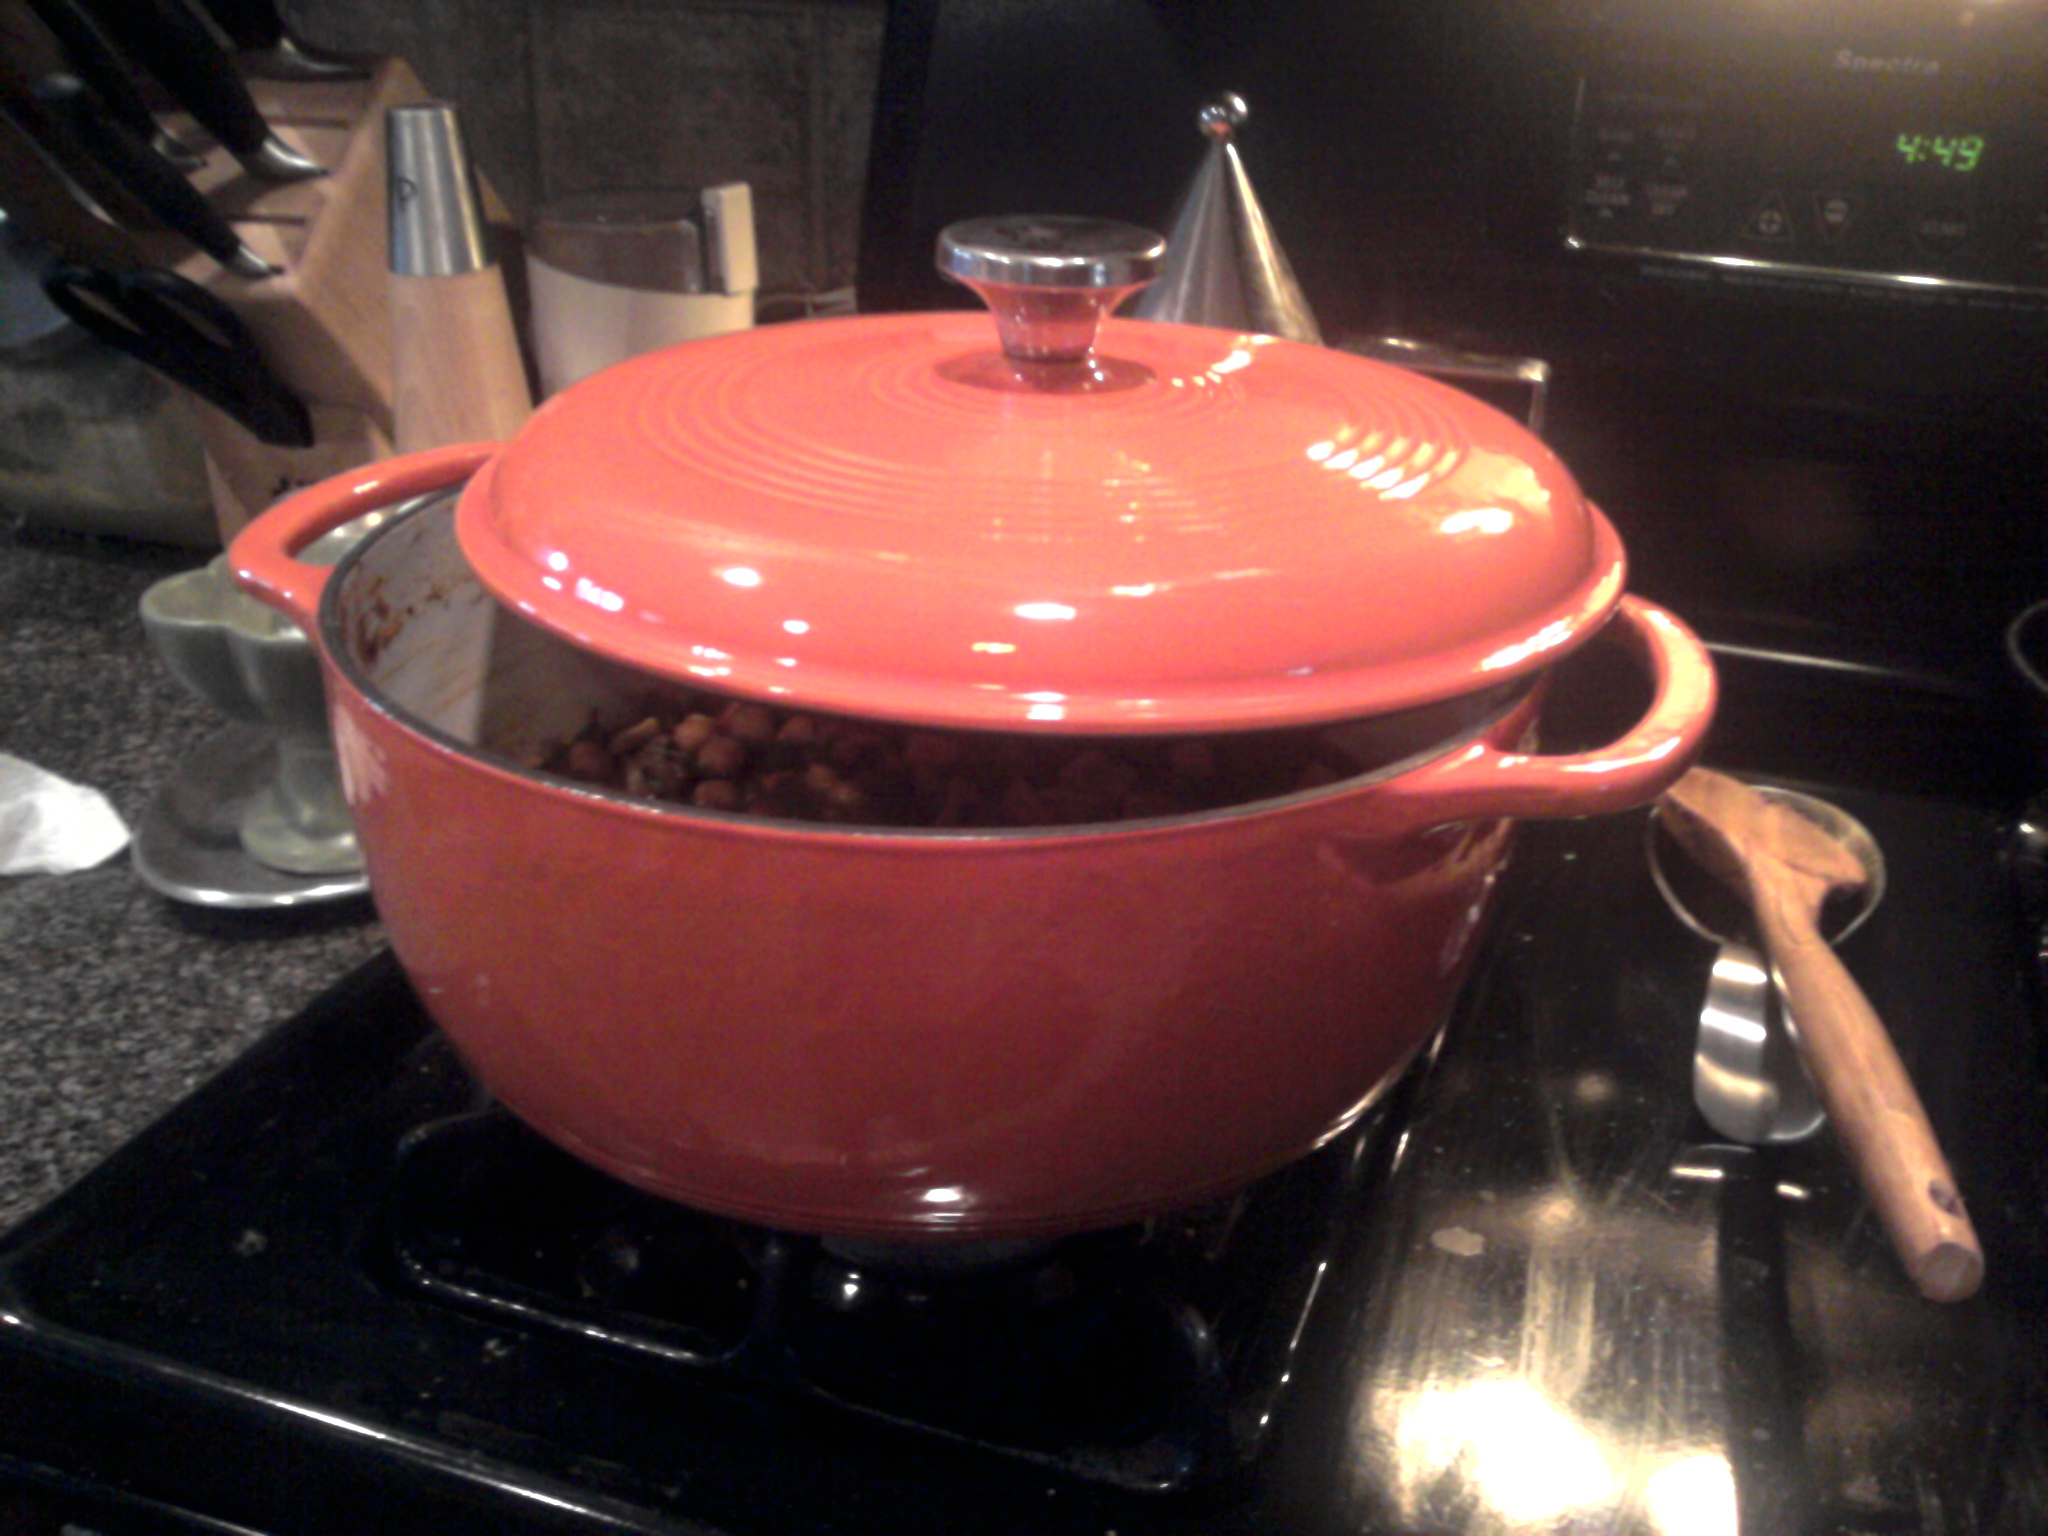 Enameled Cast Iron Soup Pot with Lid, Small Pumpkin, Dutch Oven